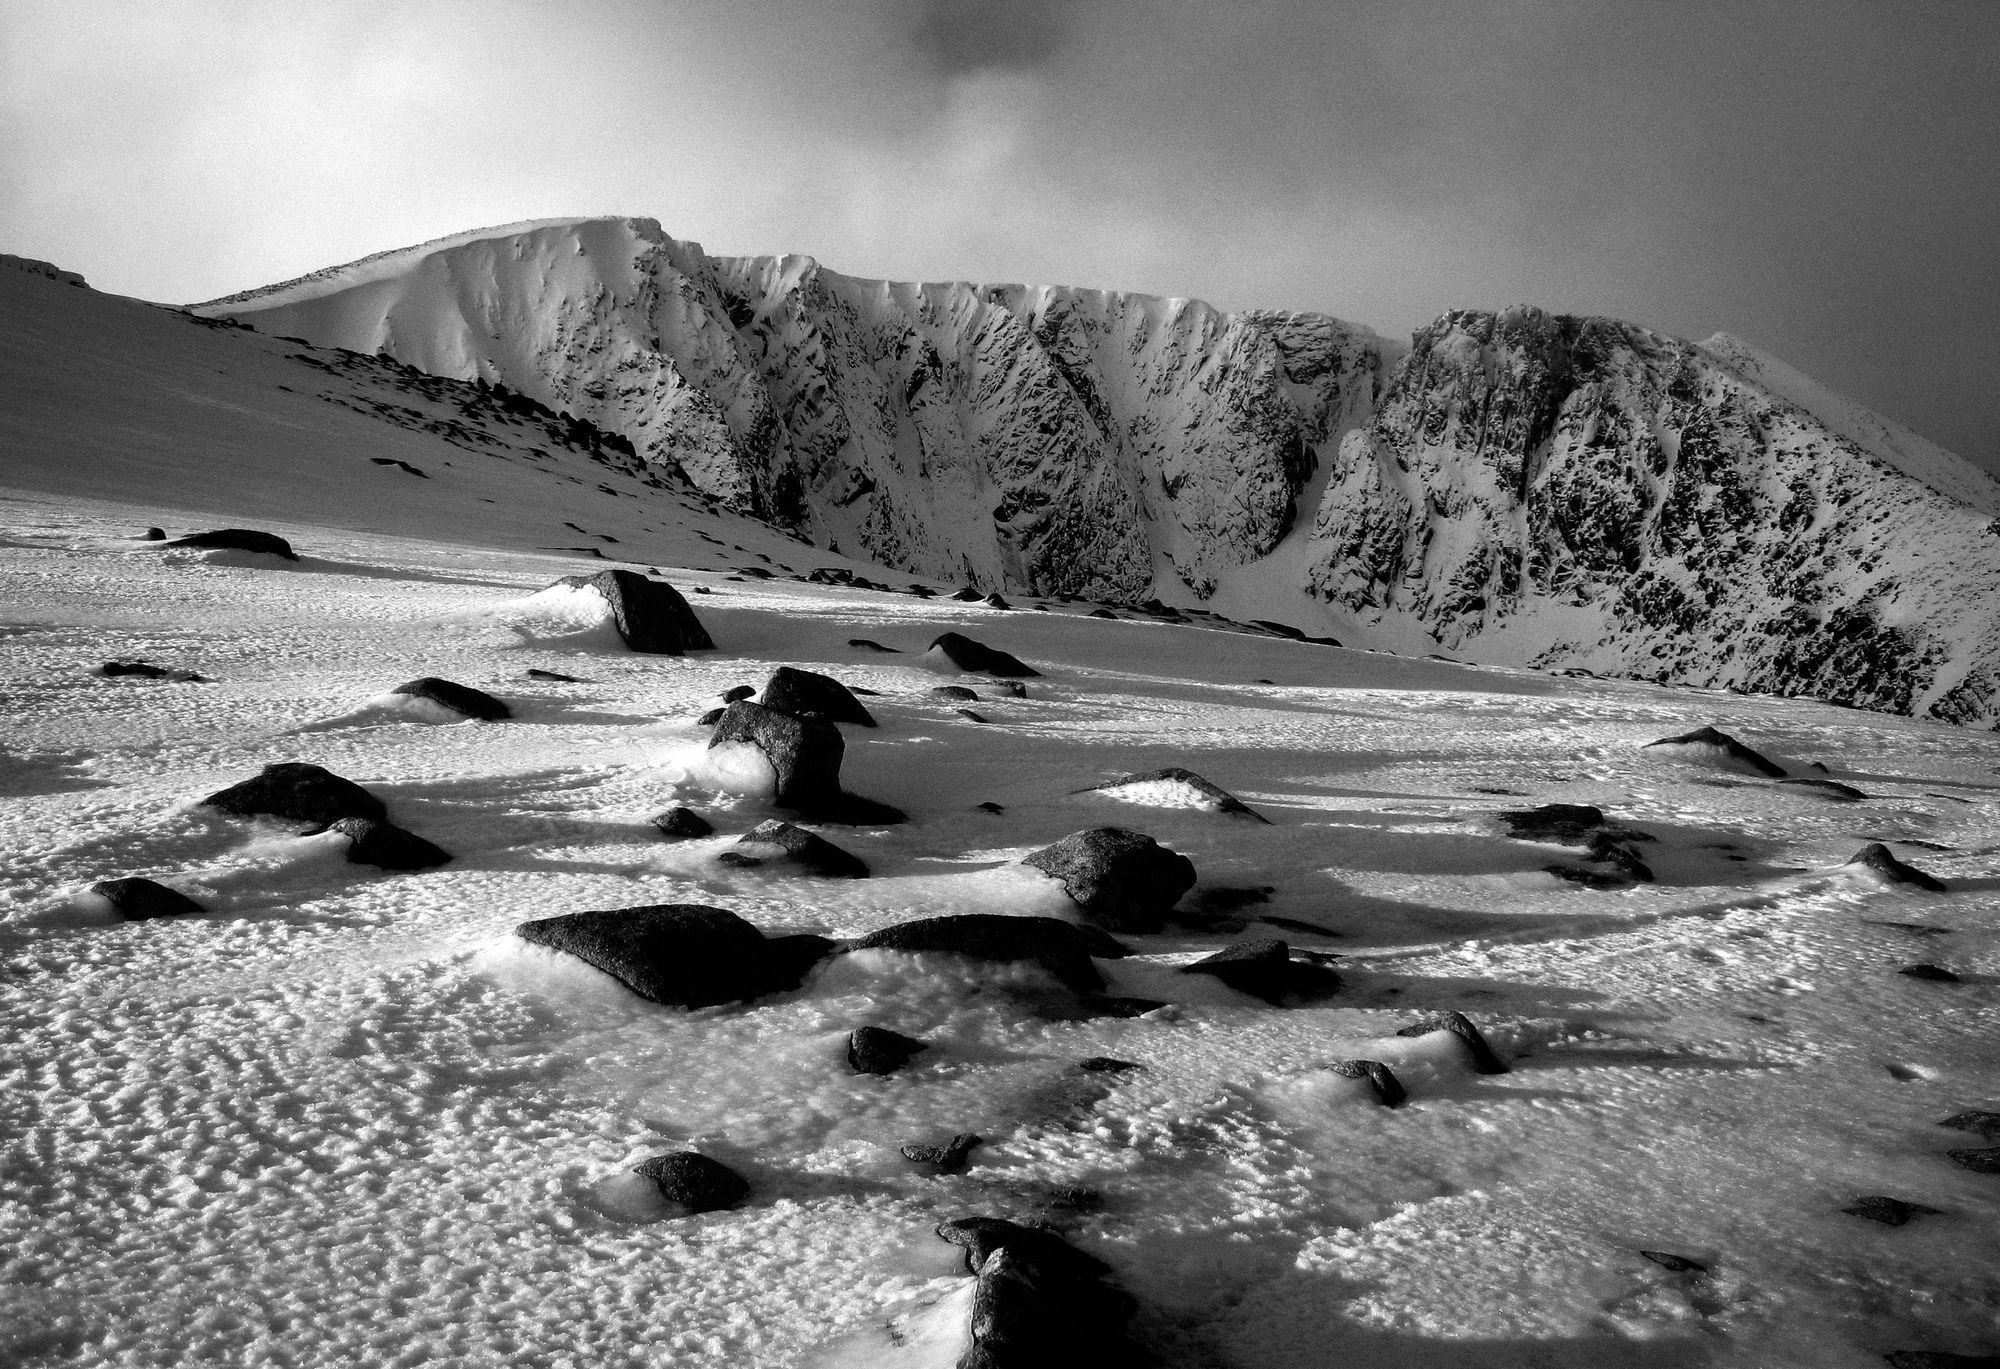 An image from my one and only trip to Lochnagar so far: January the 8th, 2014